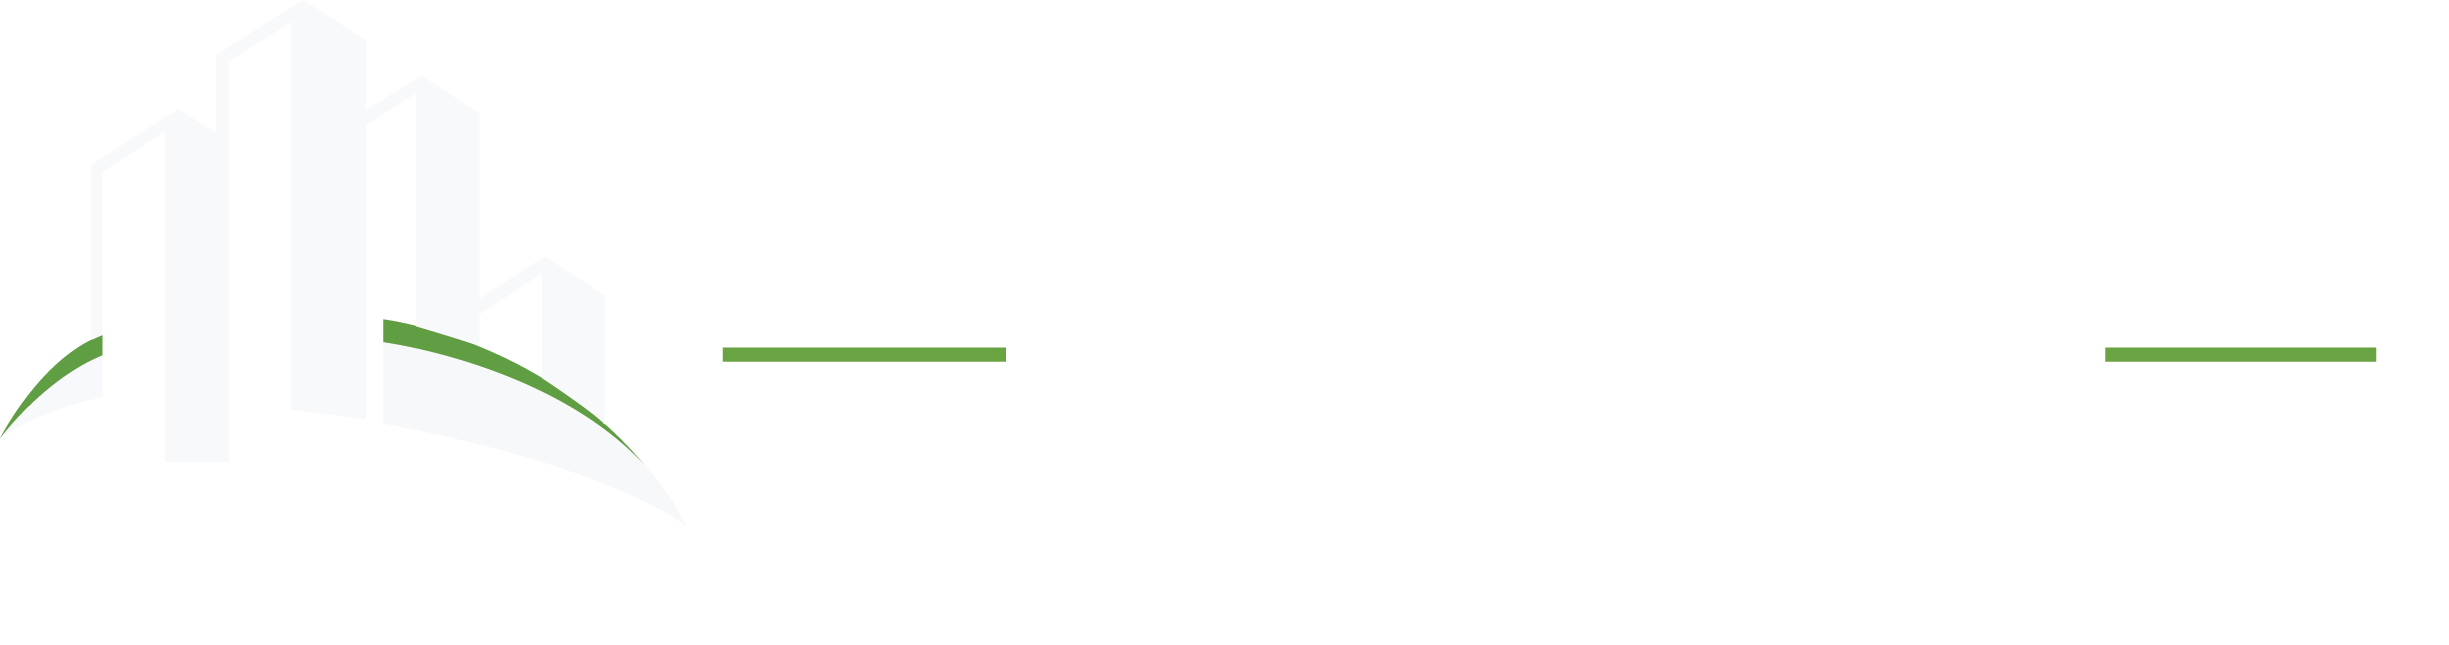 Sperry Commercial Global Affiliates - Griffin Partners